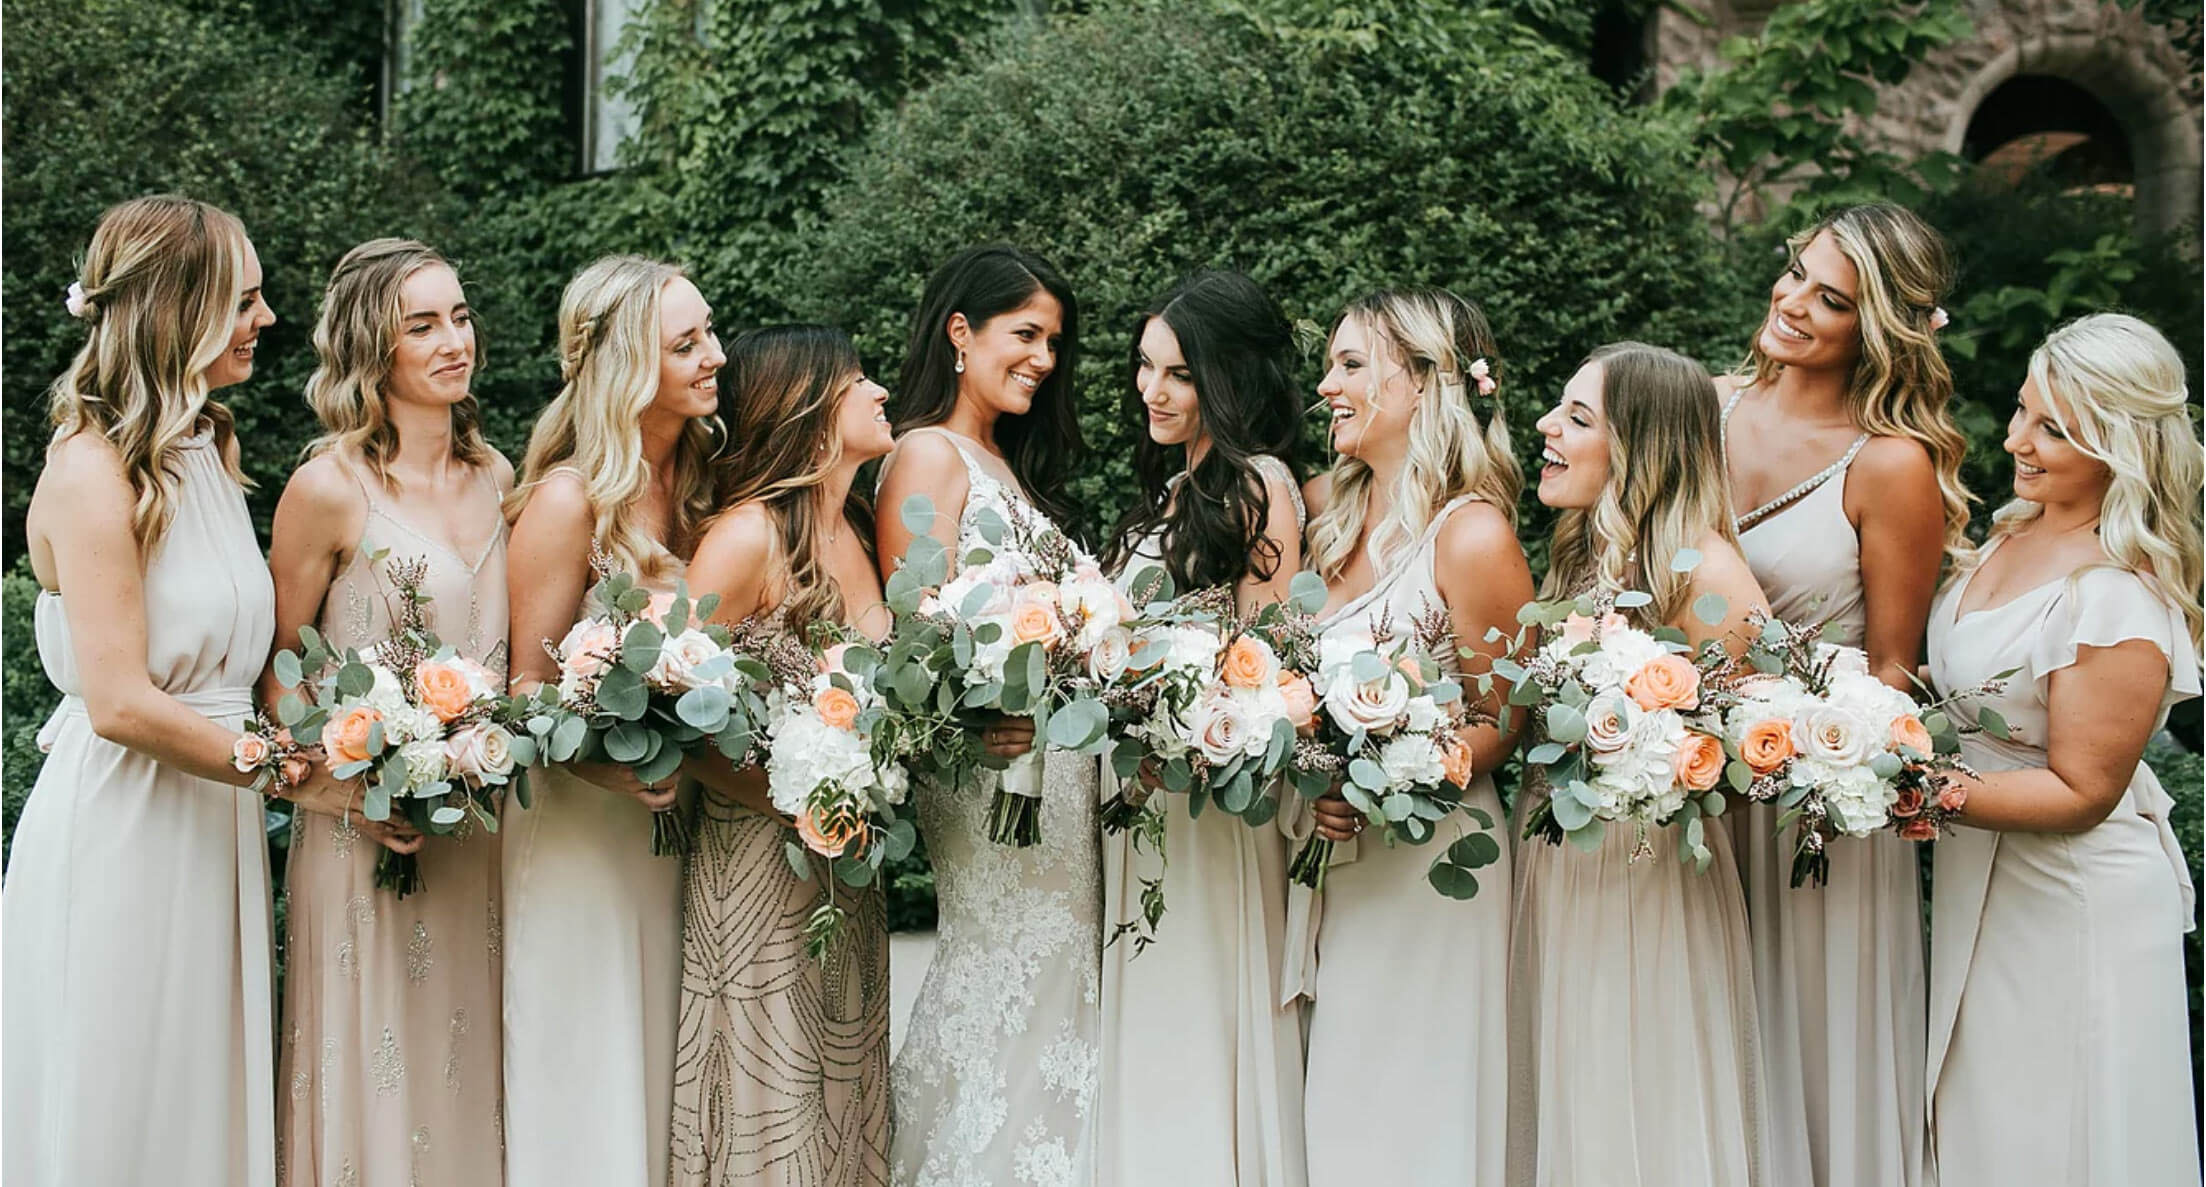 A bridal party holding bouquets admiring the bride.